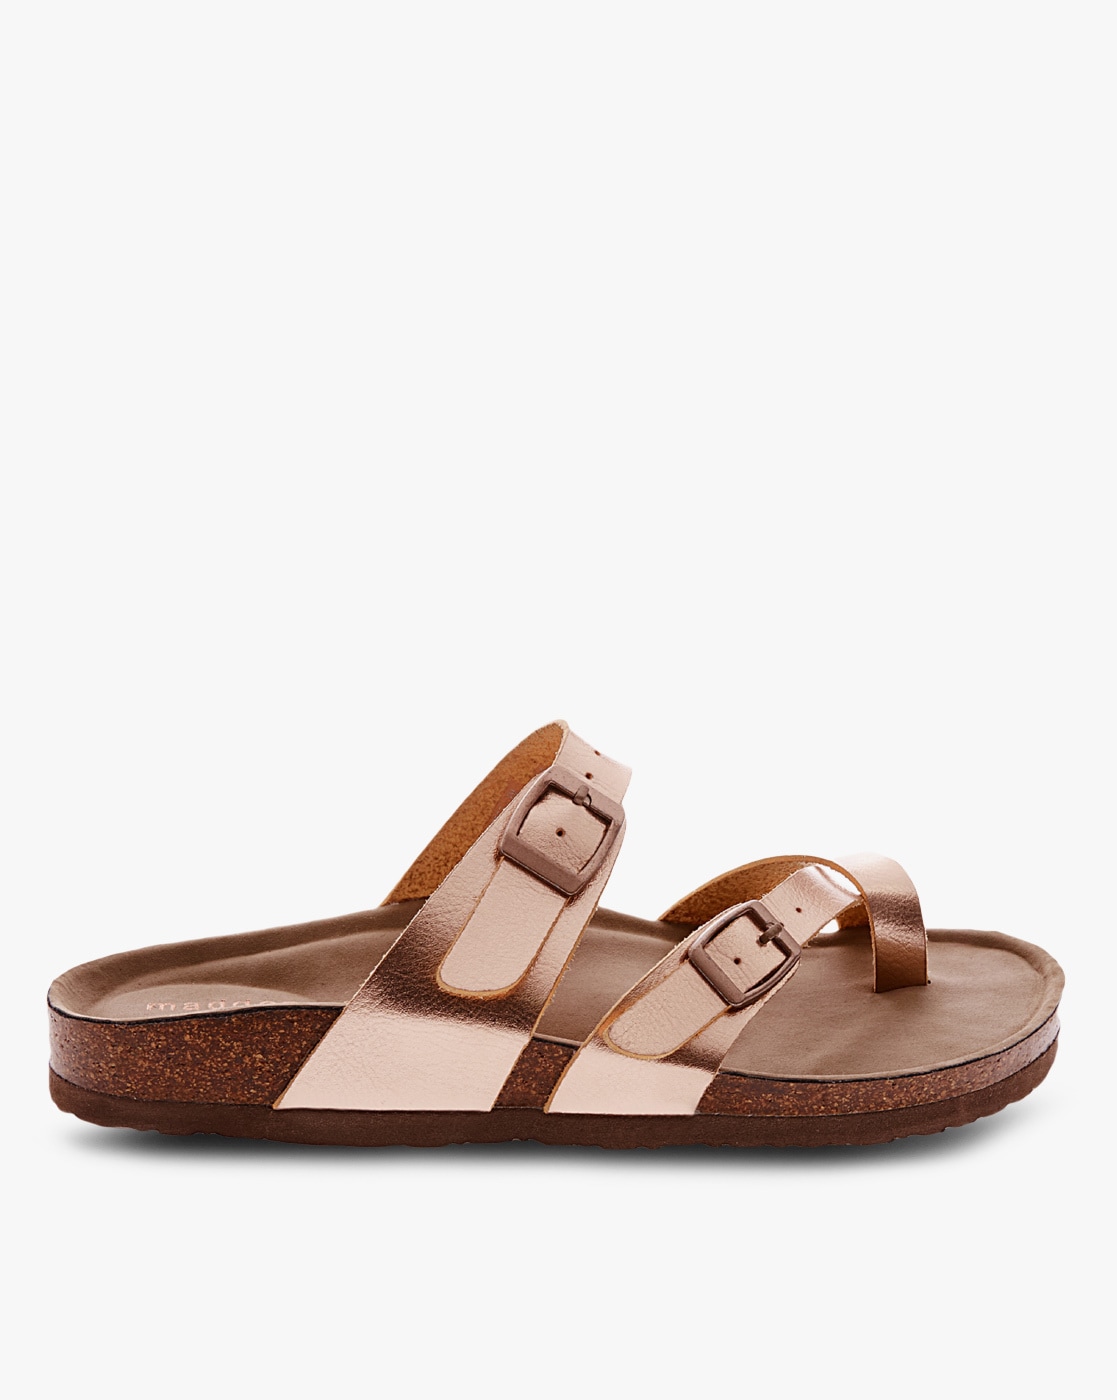 Flat Sandals for Women by MADDEN GIRL 